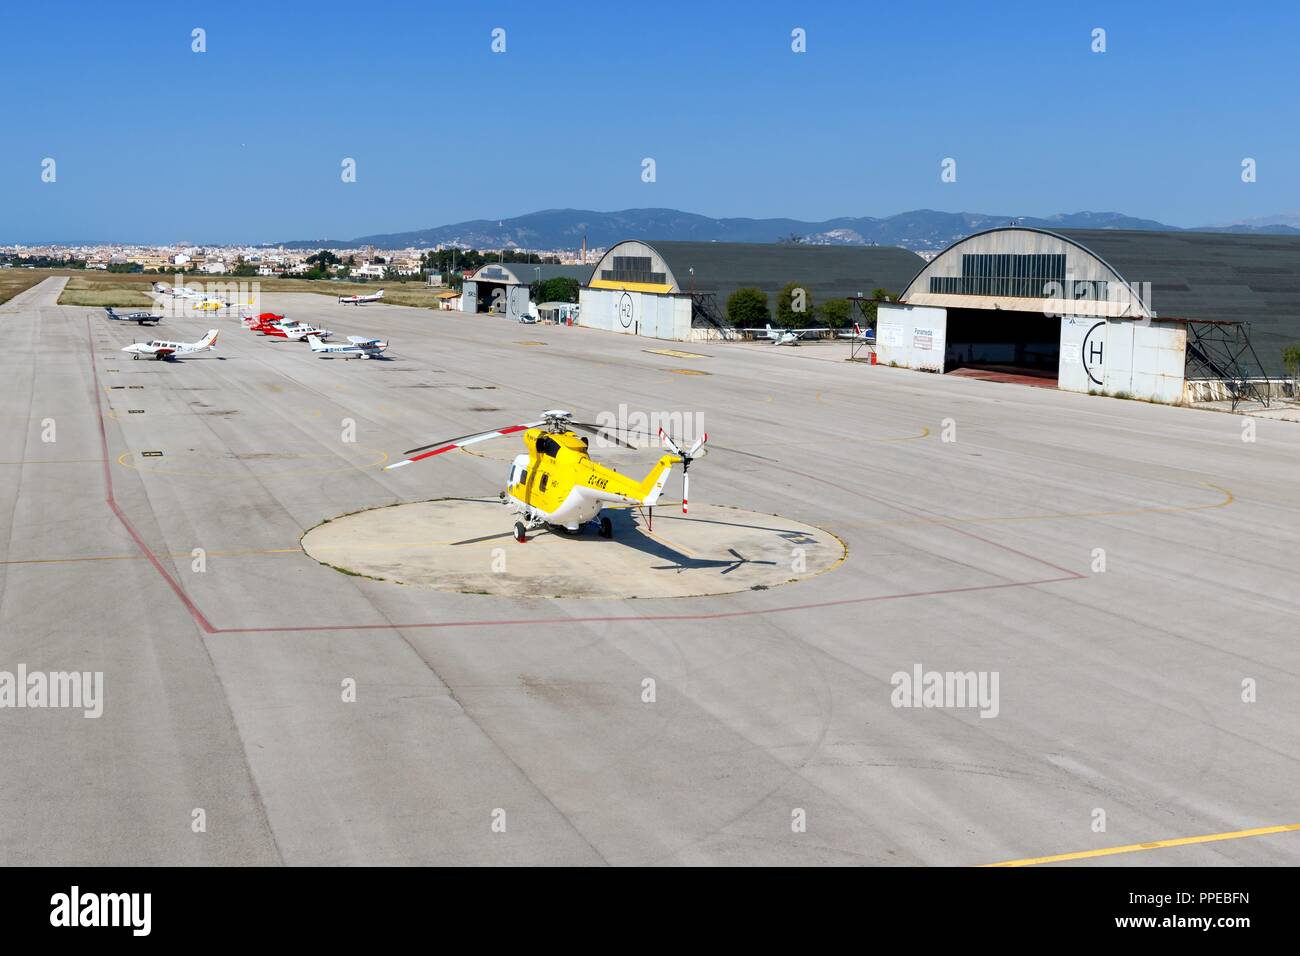 Palma de Mallorca, Spain - May 11, 2018: PZL-Swidnik W3 Sokol helicopter at Son Bnet airport in Spain. | usage worldwide Stock Photo